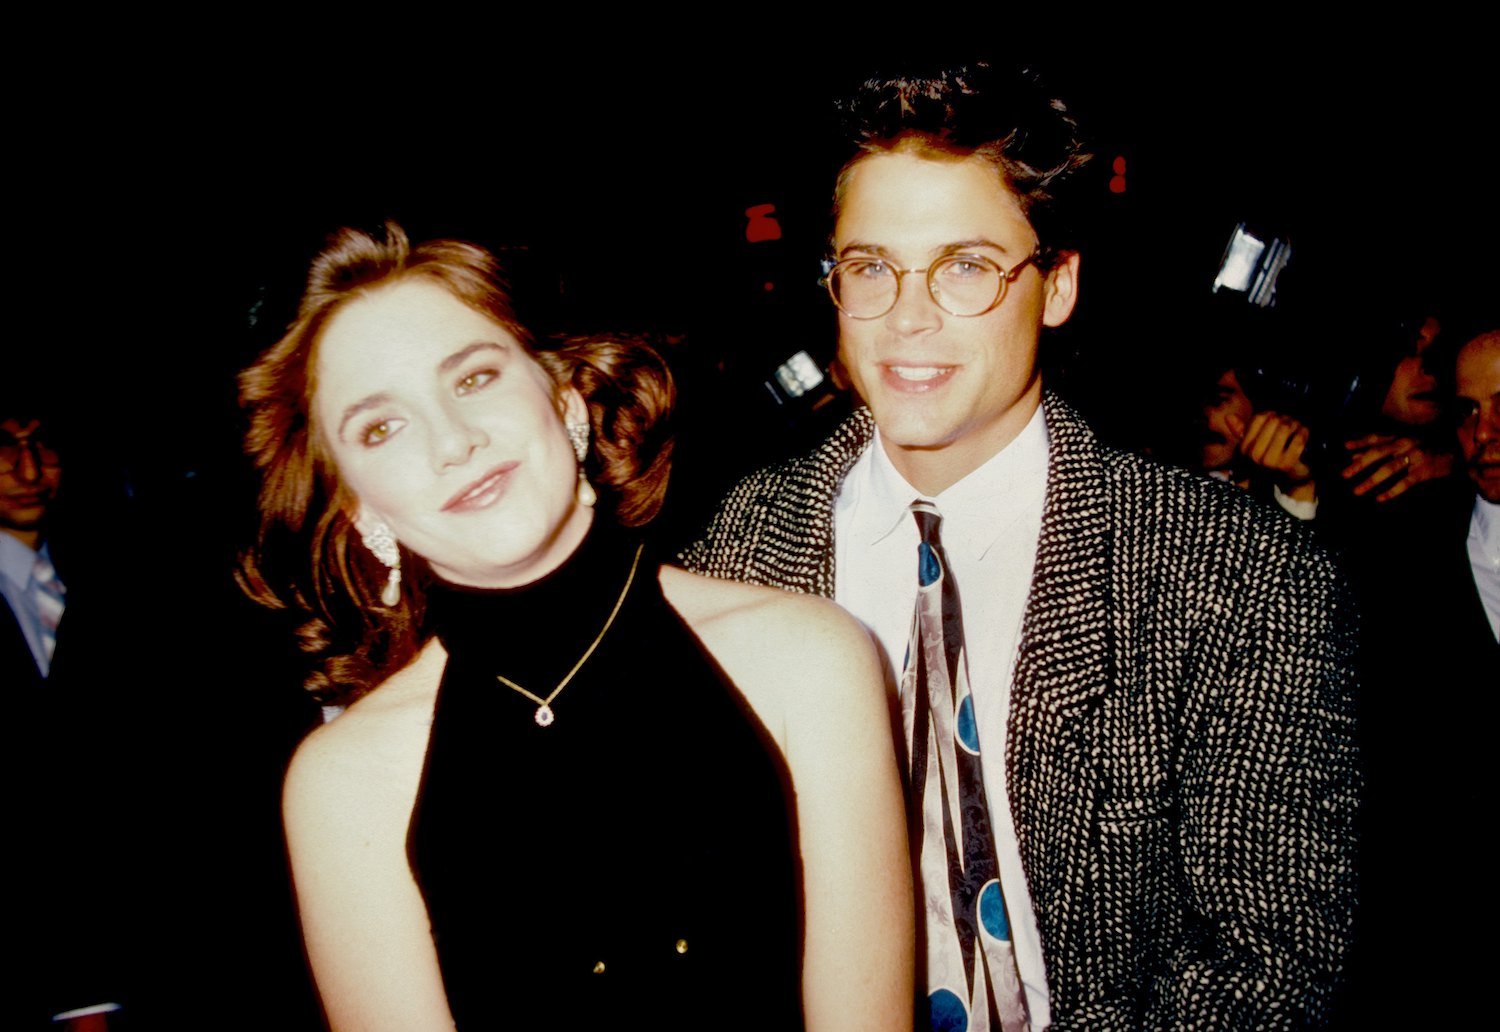 Rob Lowe and Melissa Gilbert attend an event in October 1987 in Los Angeles, California